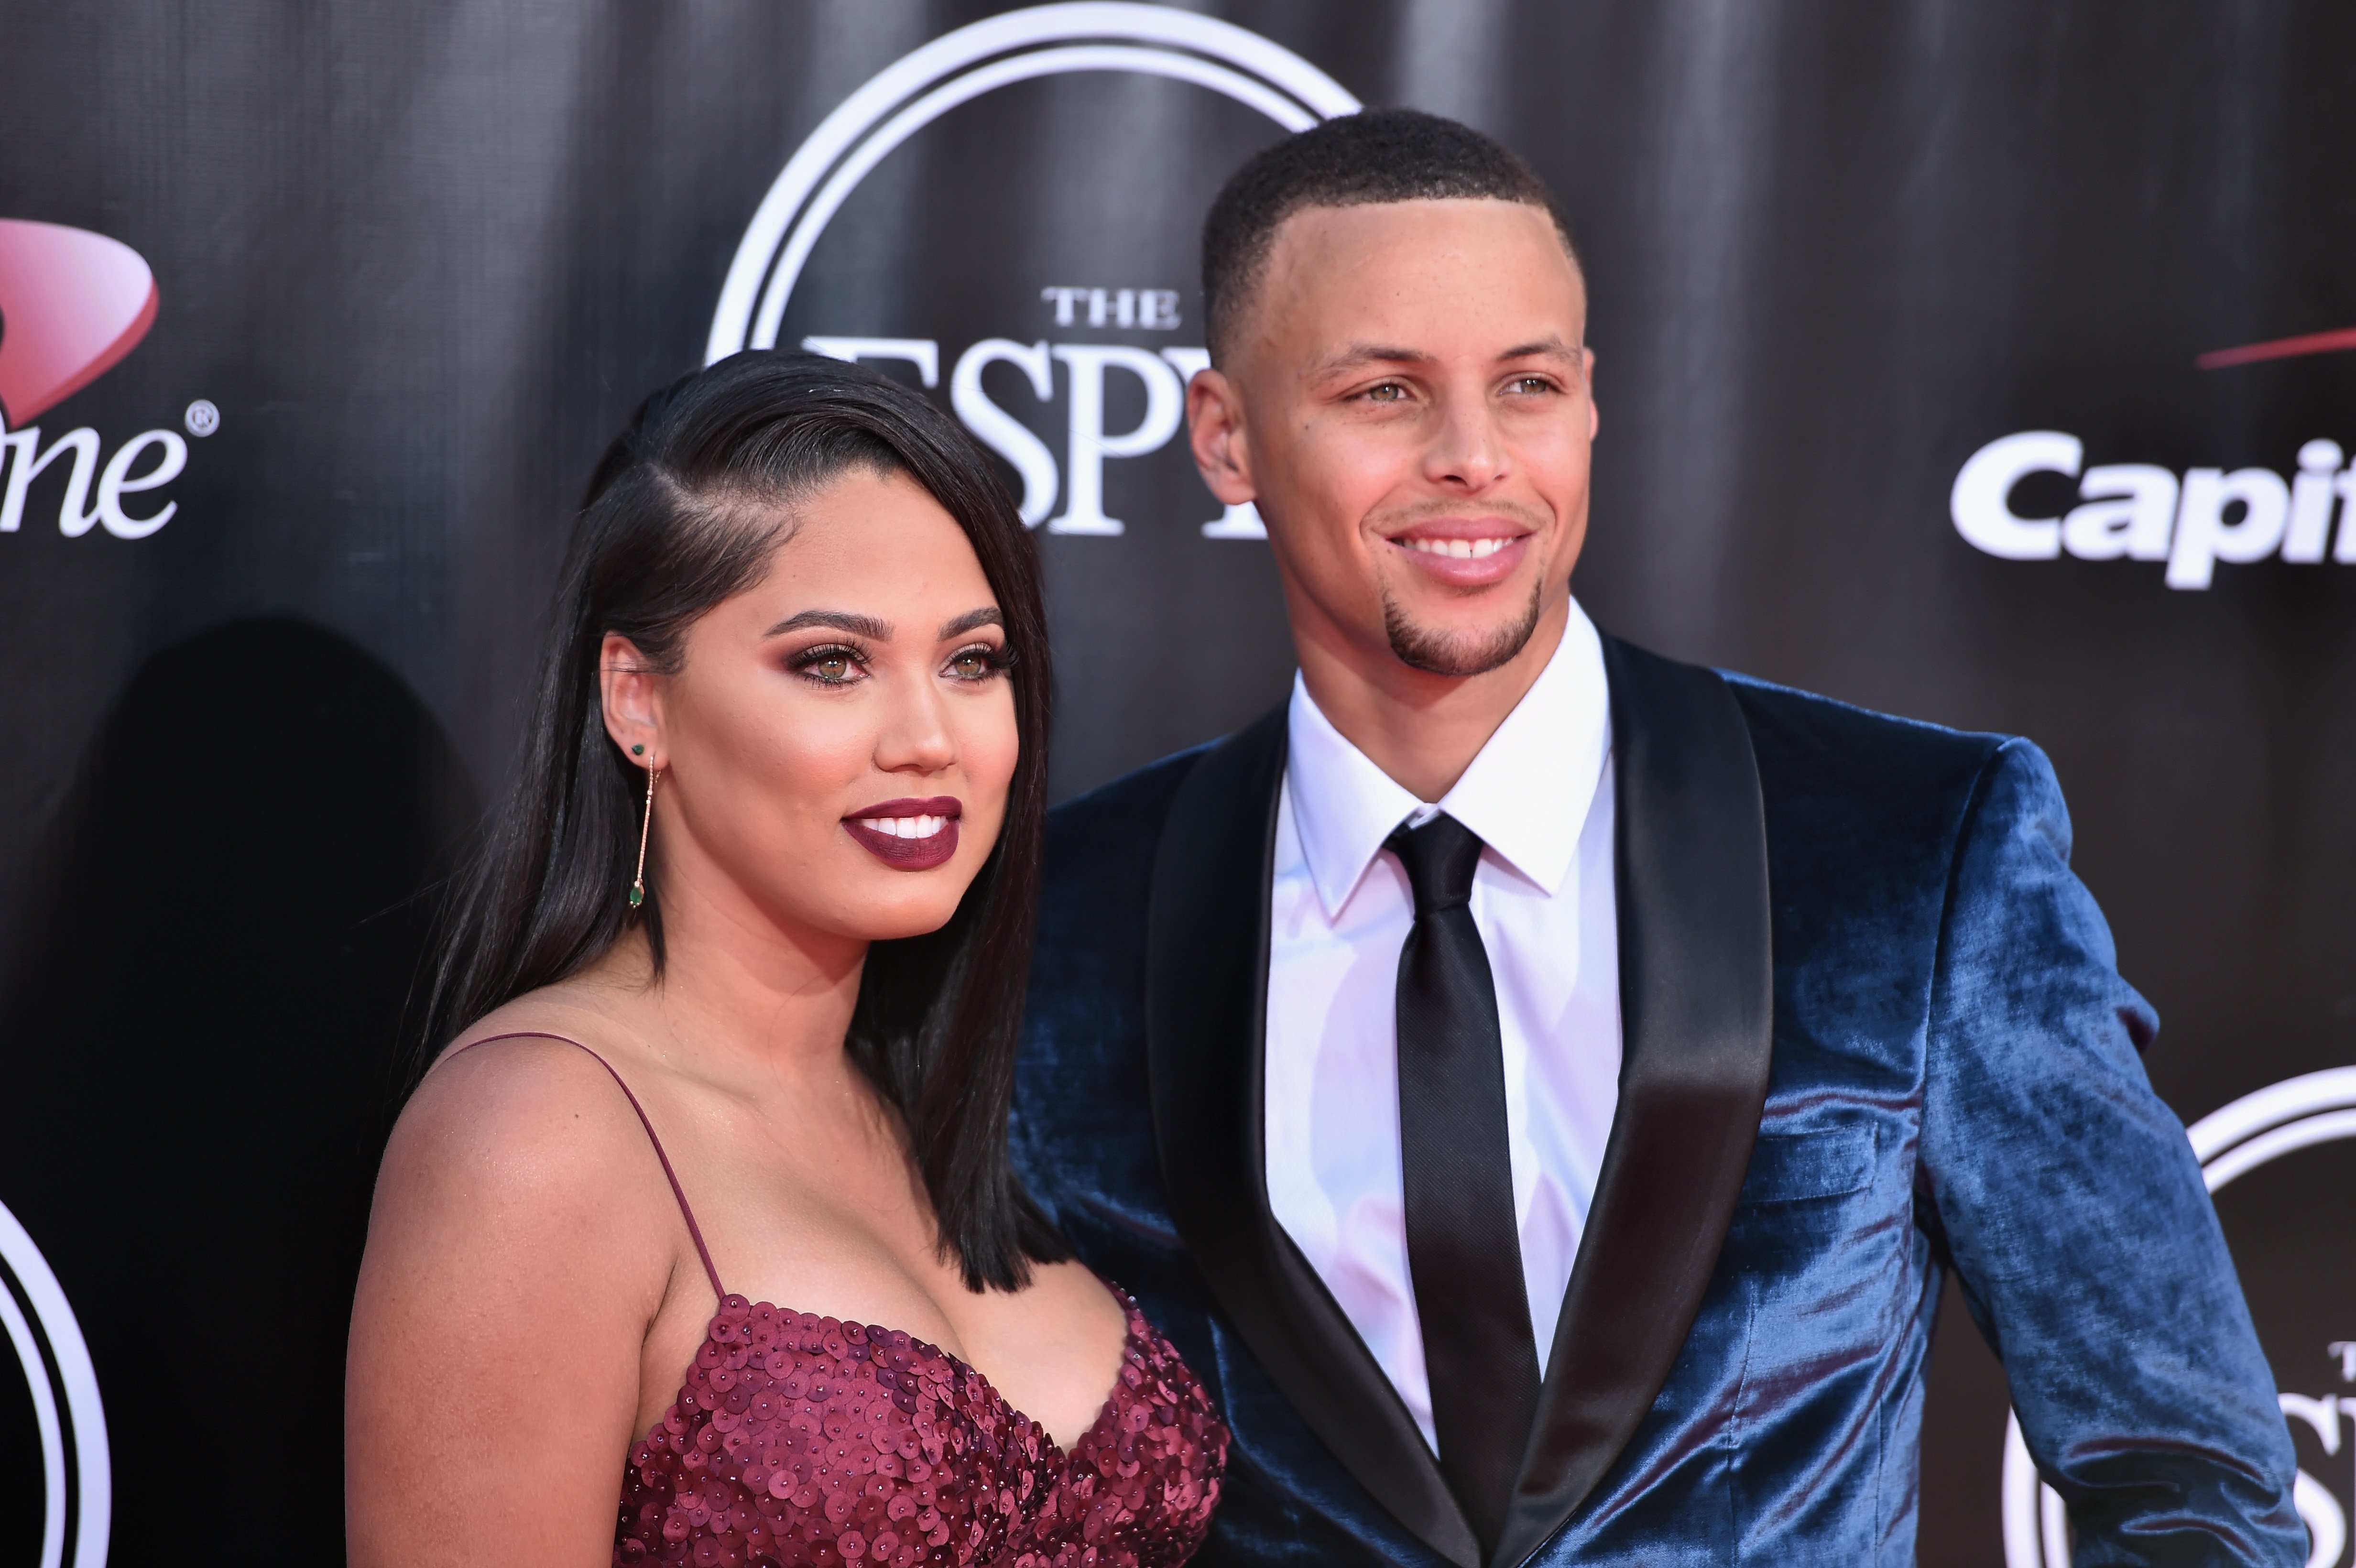 Stephen Curry and Ayesha Curry at the 2016 ESPYS at Microsoft Theater on July 13, 2016. | Photo: Getty Images